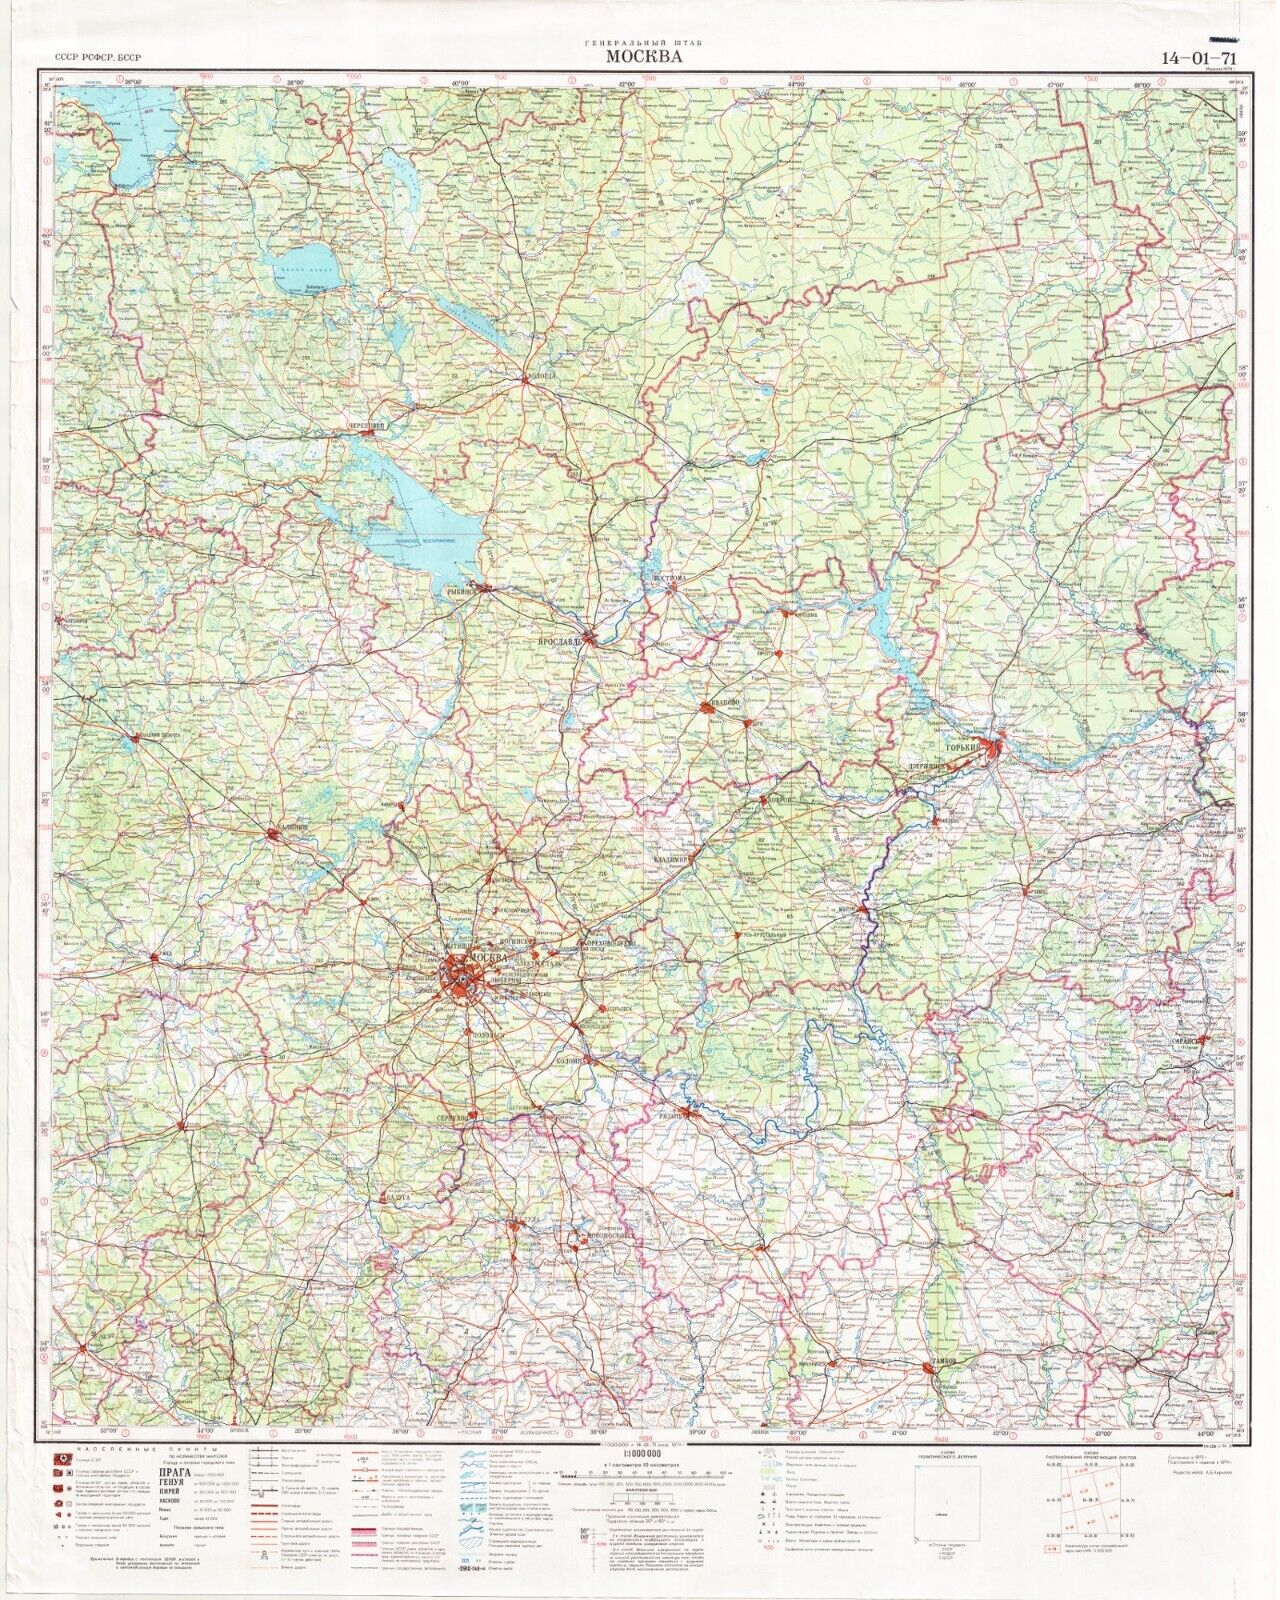 Russian Soviet Military Topographic Map - MOSCOW (Russia) 1:1 000 000, ed. 1974